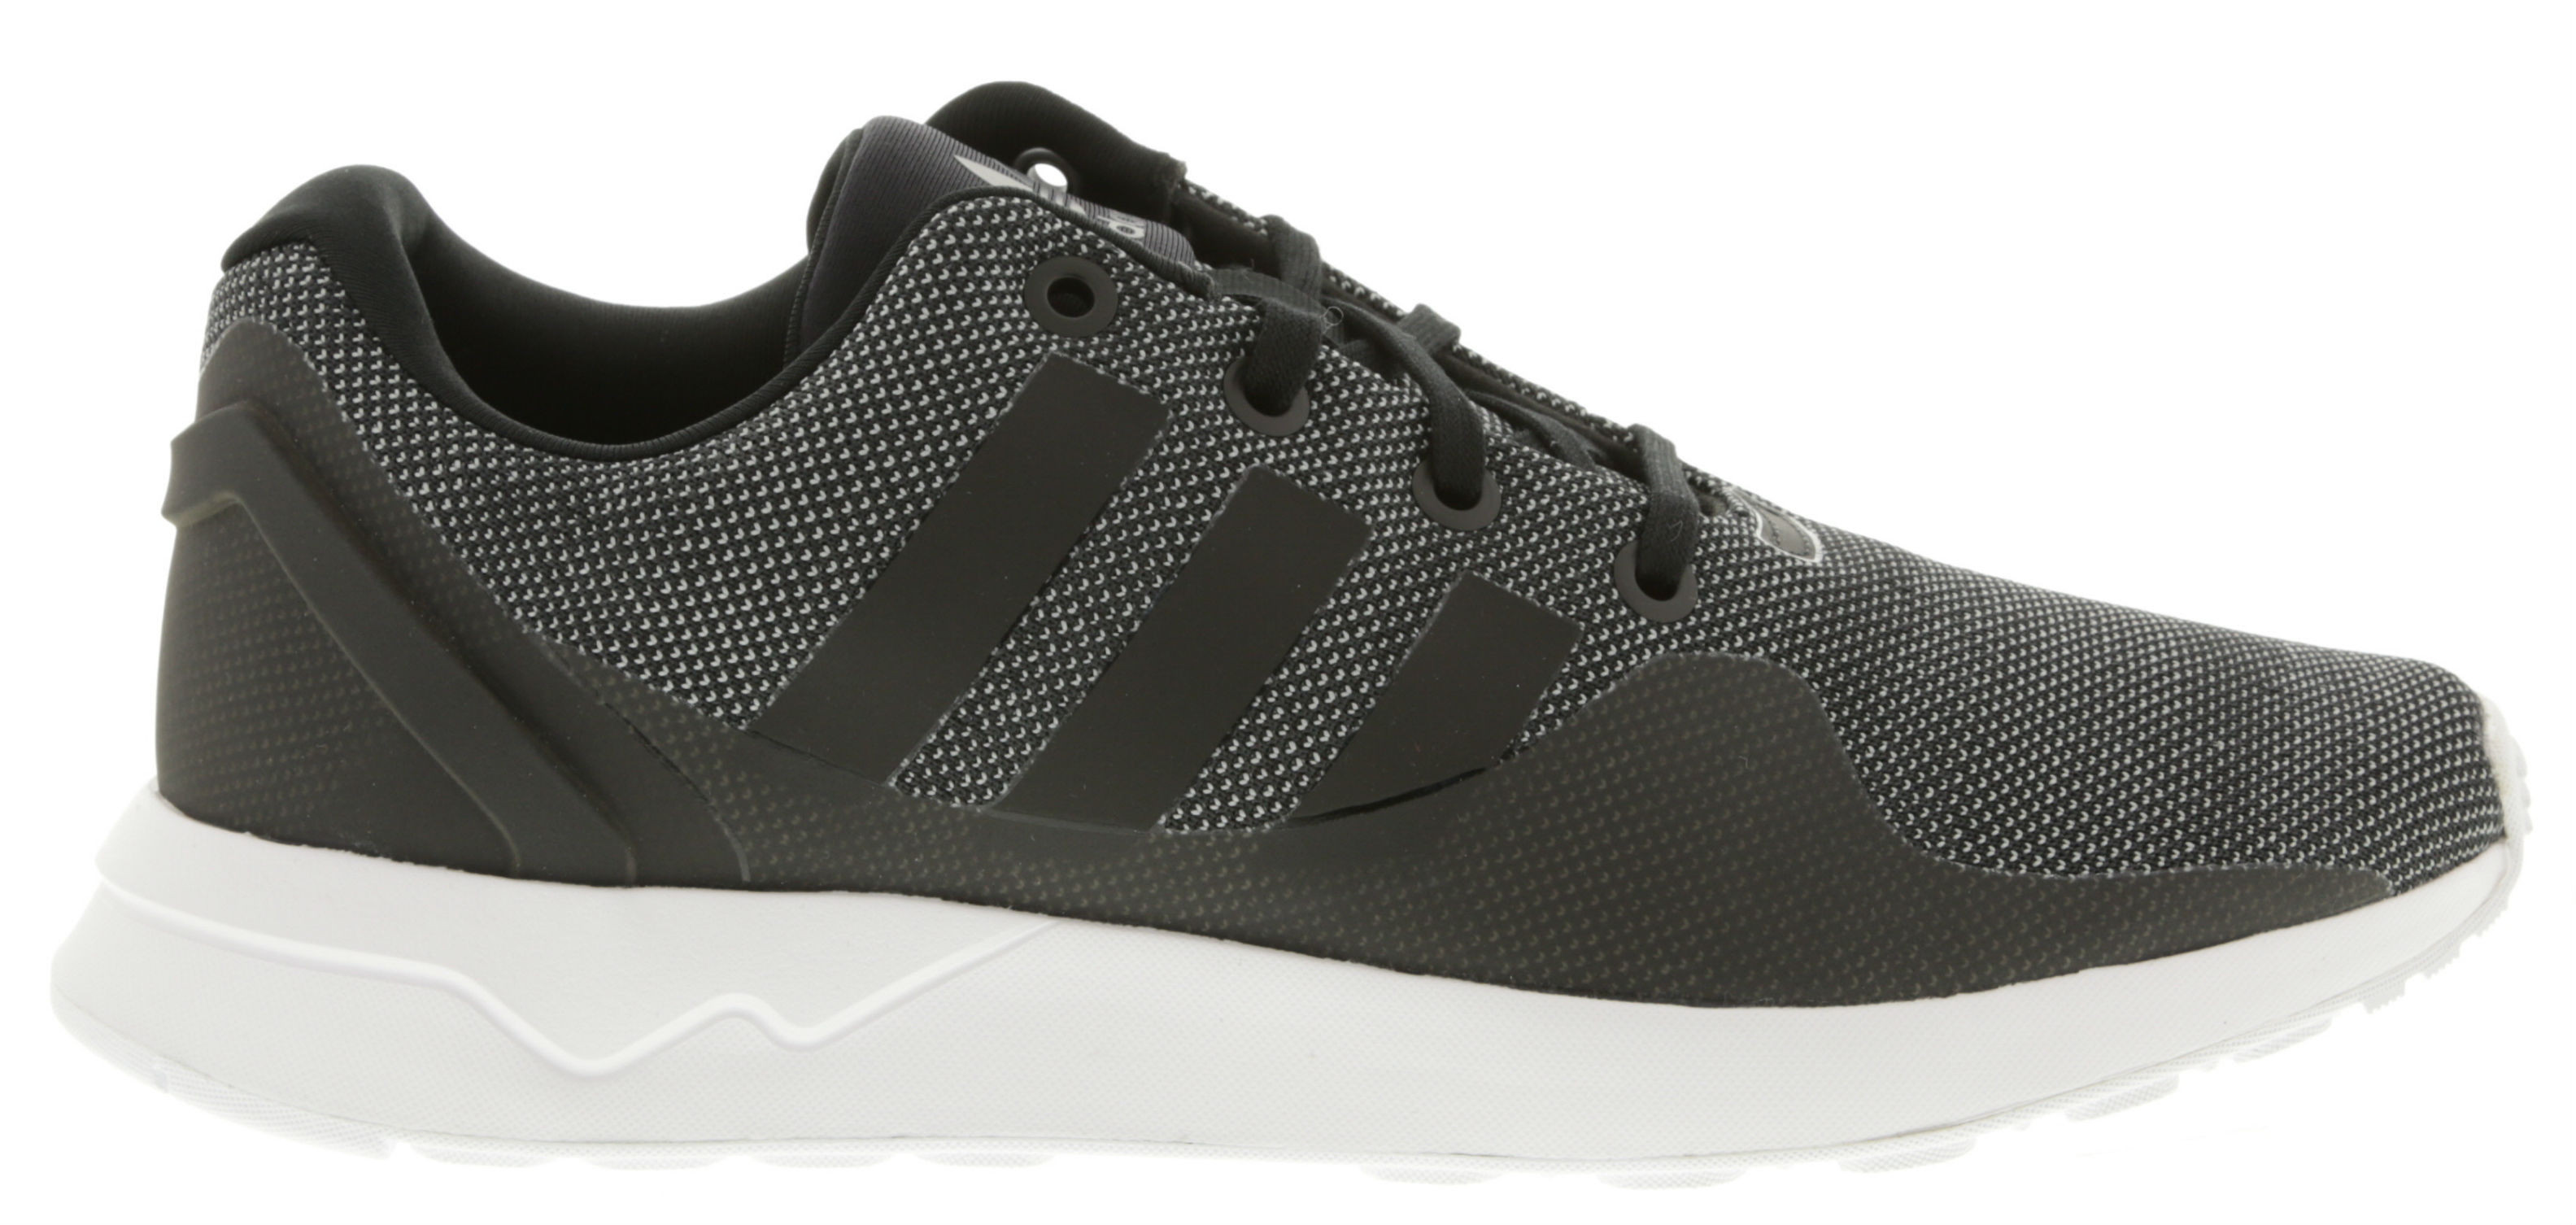 adidas zx 400 homme pas cher